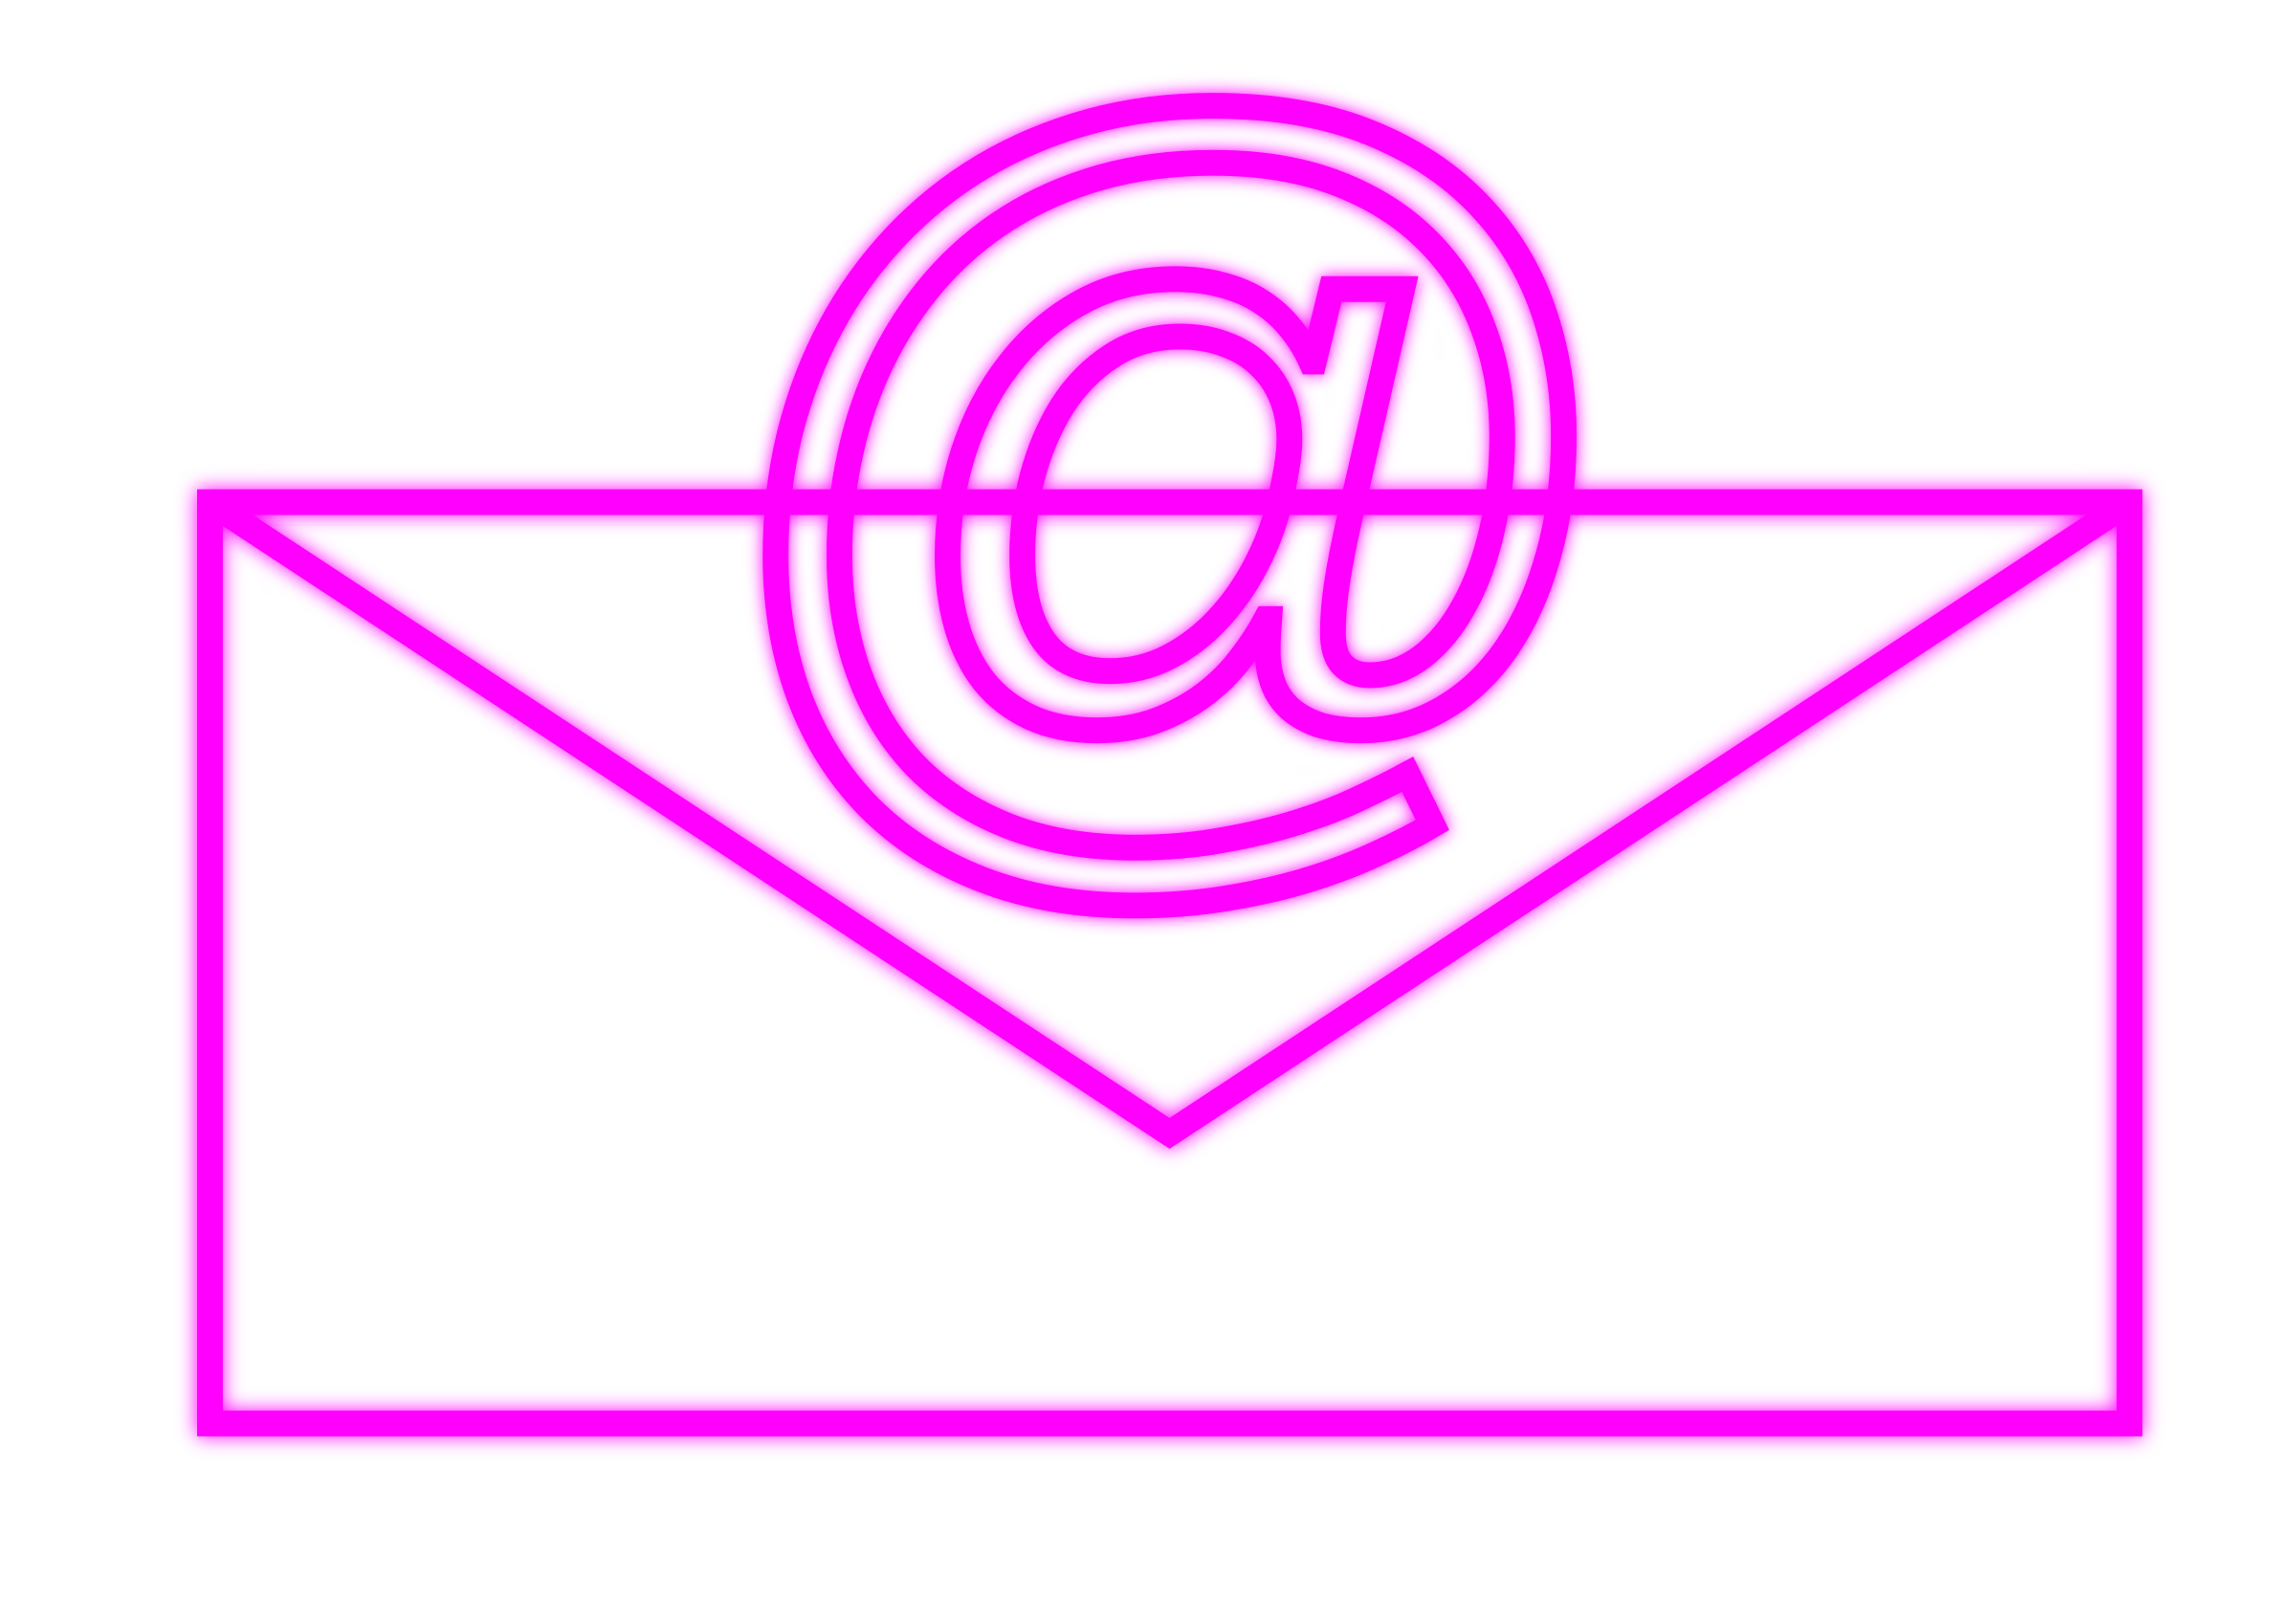 email clipart pink